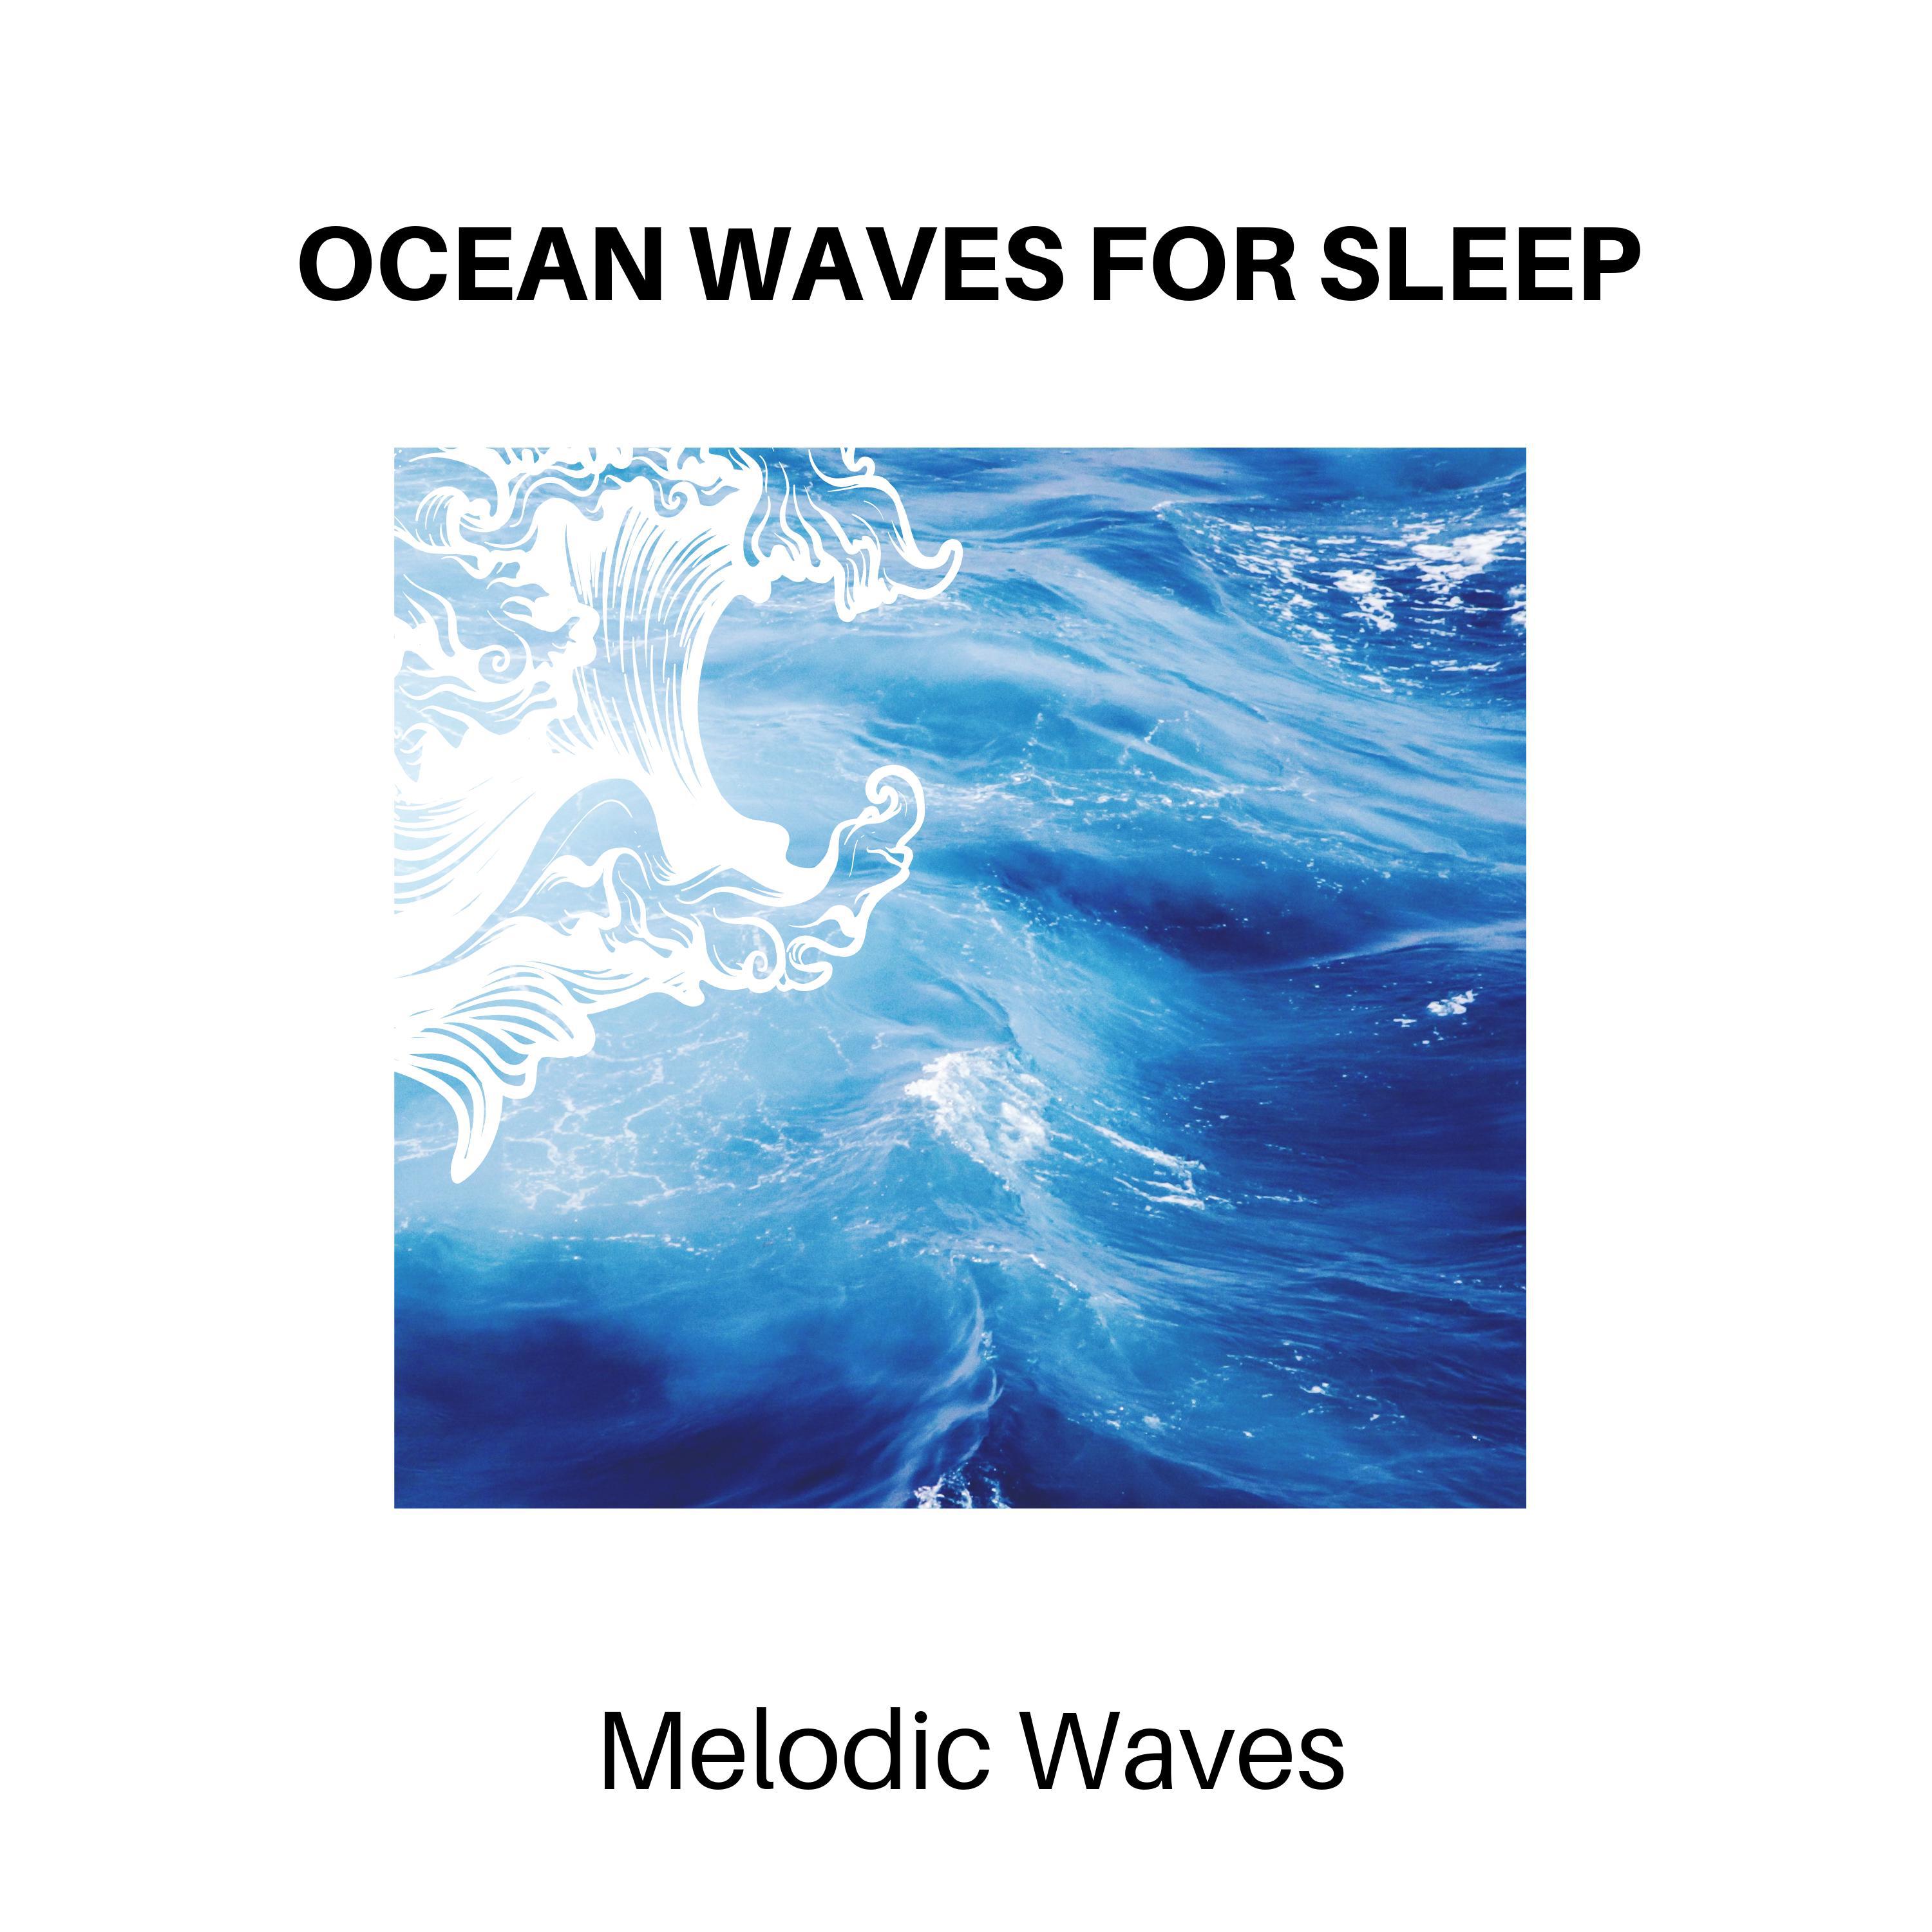 Bubbly Oceans - Luring Ocean Waves